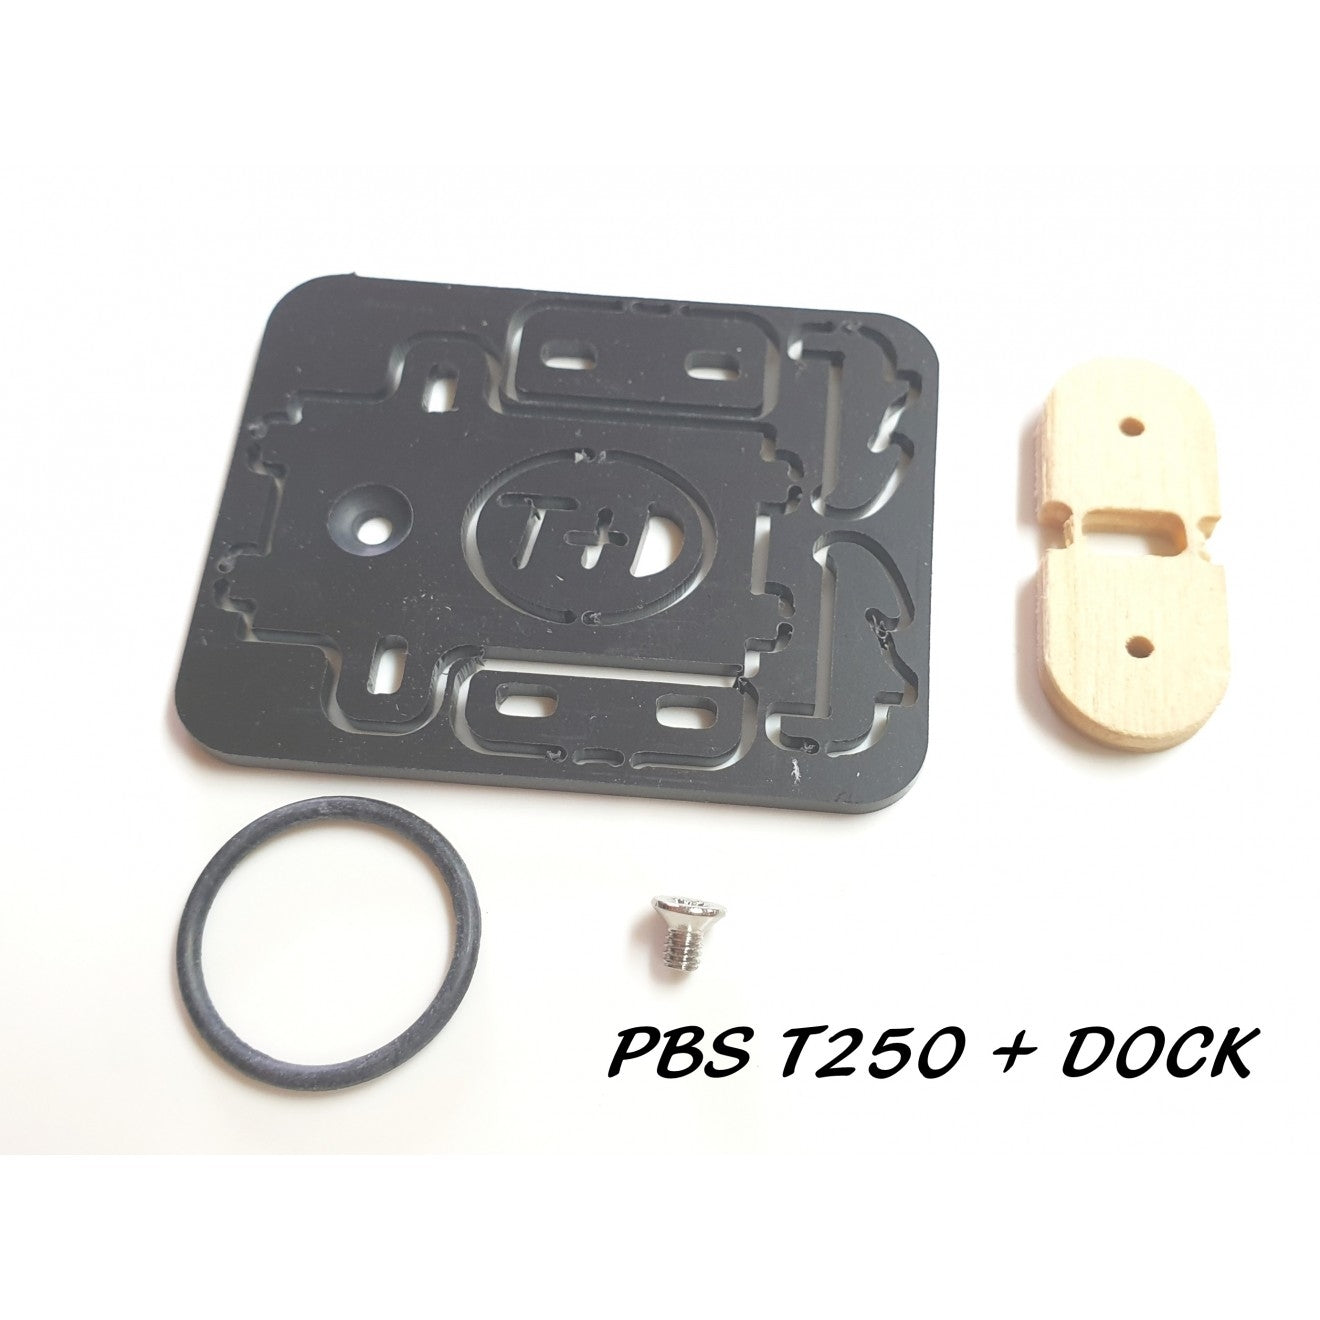 PowerBox Systems Click Holder for PBS T250 or DOCK from STV Tech 021-14